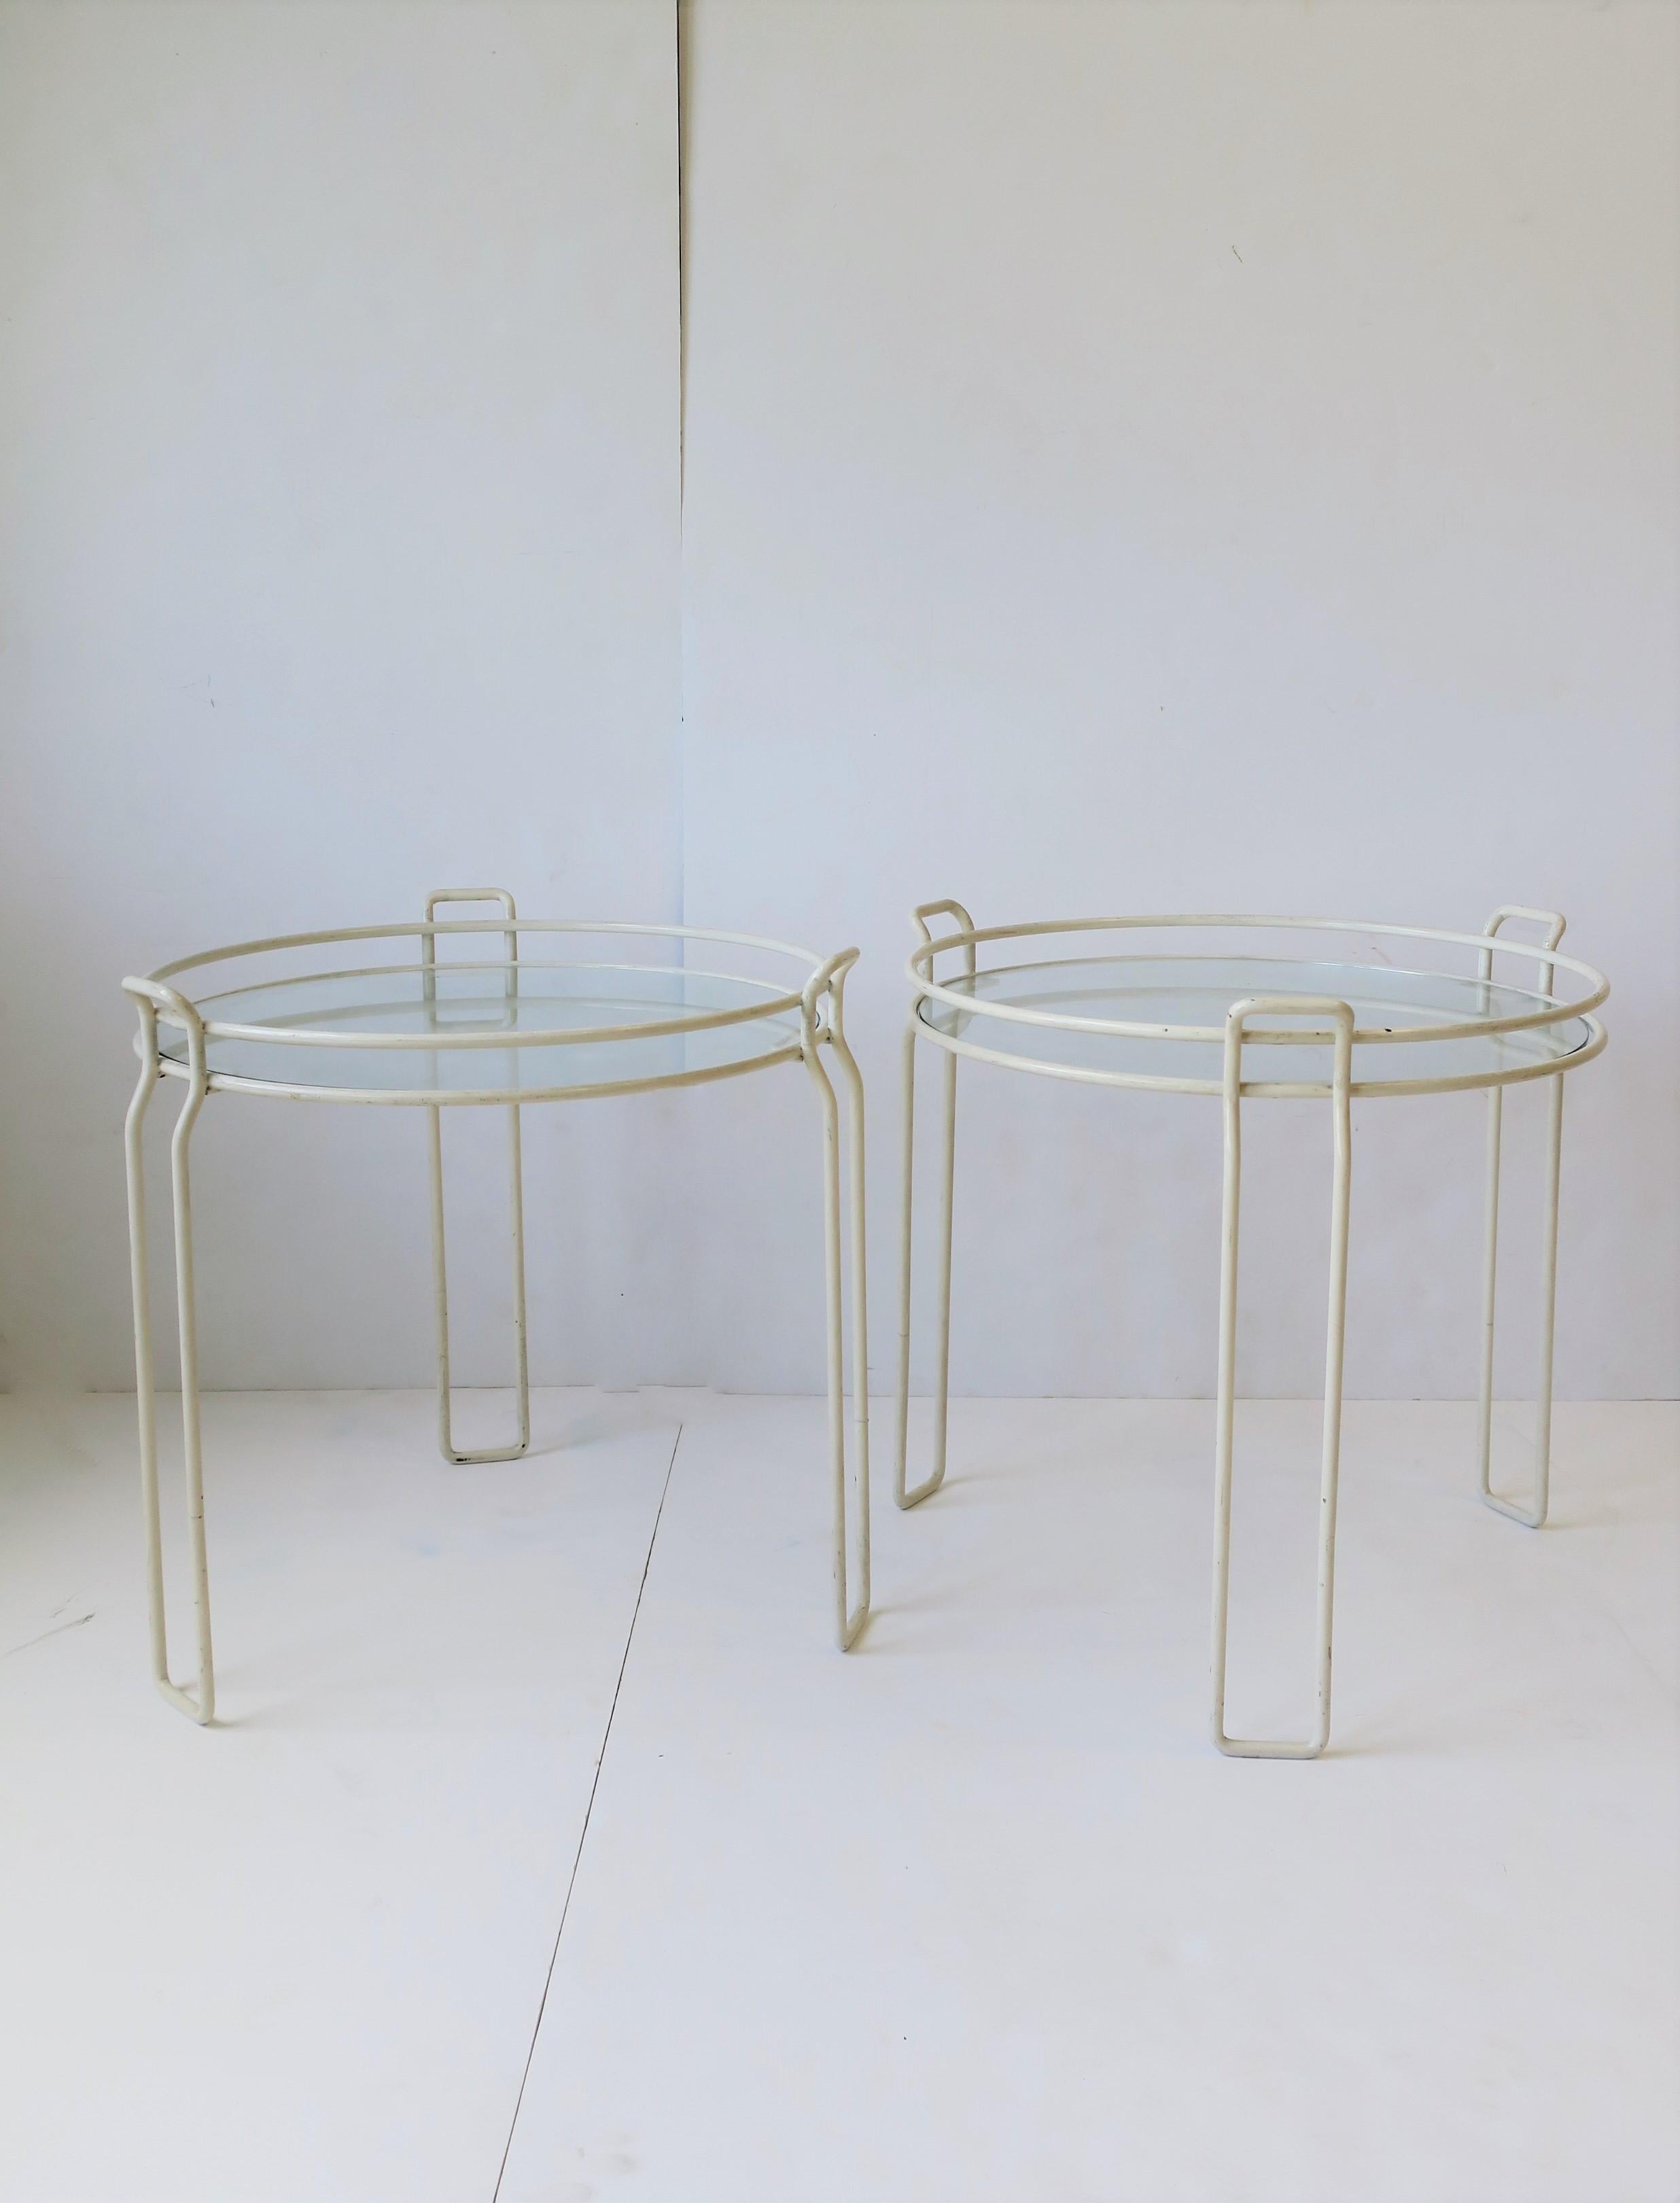 European Midcentury Modern White Side Drinks Nesting or Stacking Tables, Pair, 1960s For Sale